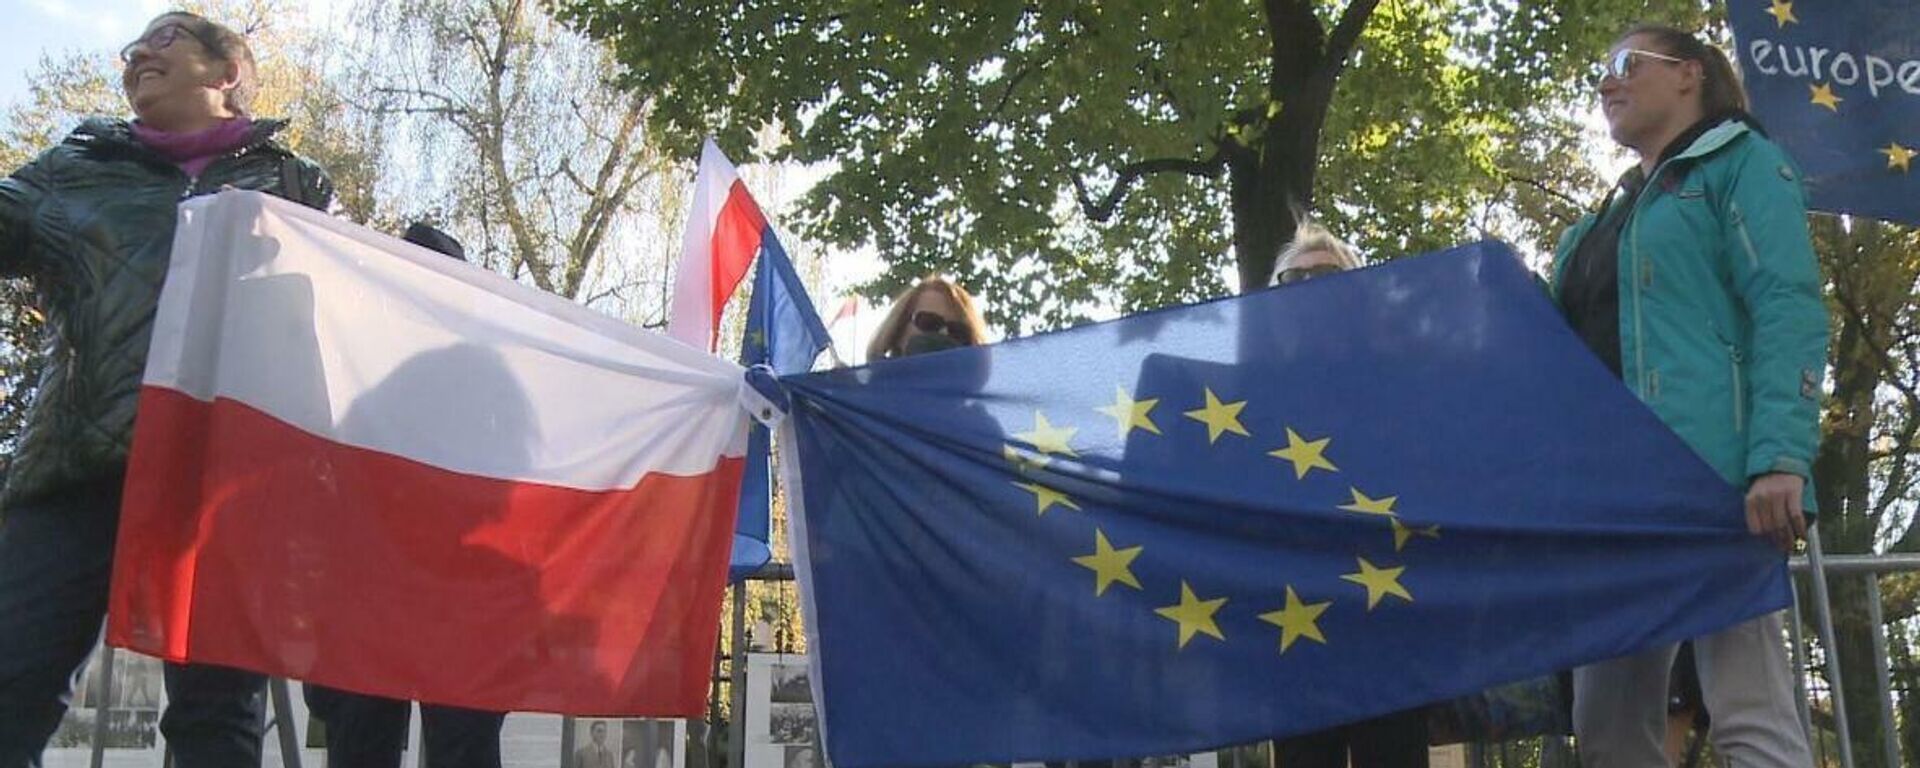 Poland: Protesters demonstrate after Polish highest court says EU laws are unconstitutional - Sputnik Молдова, 1920, 08.10.2021